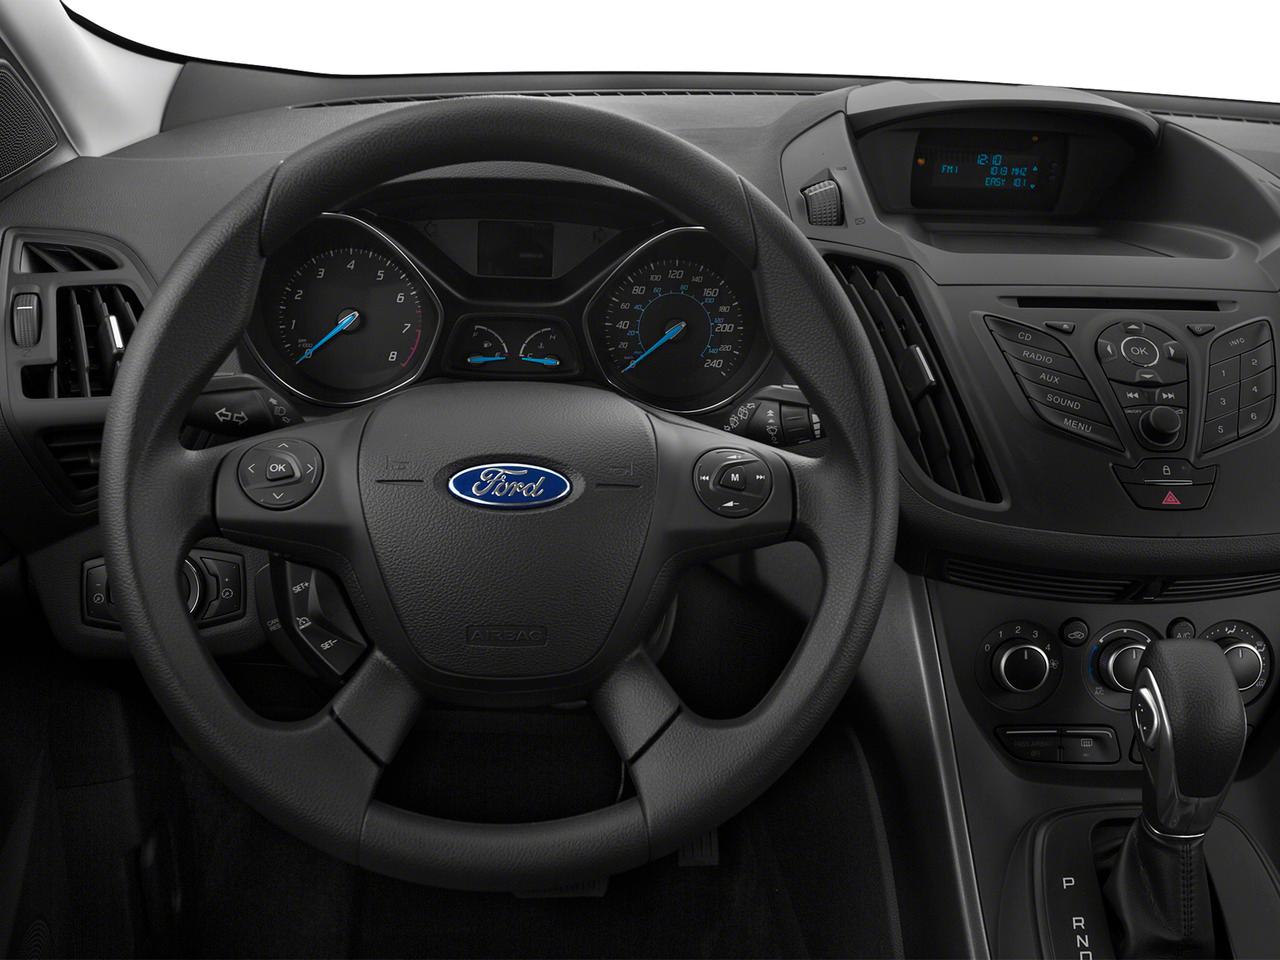 2015 Ford Escape Vehicle Photo in BOONVILLE, IN 47601-9633